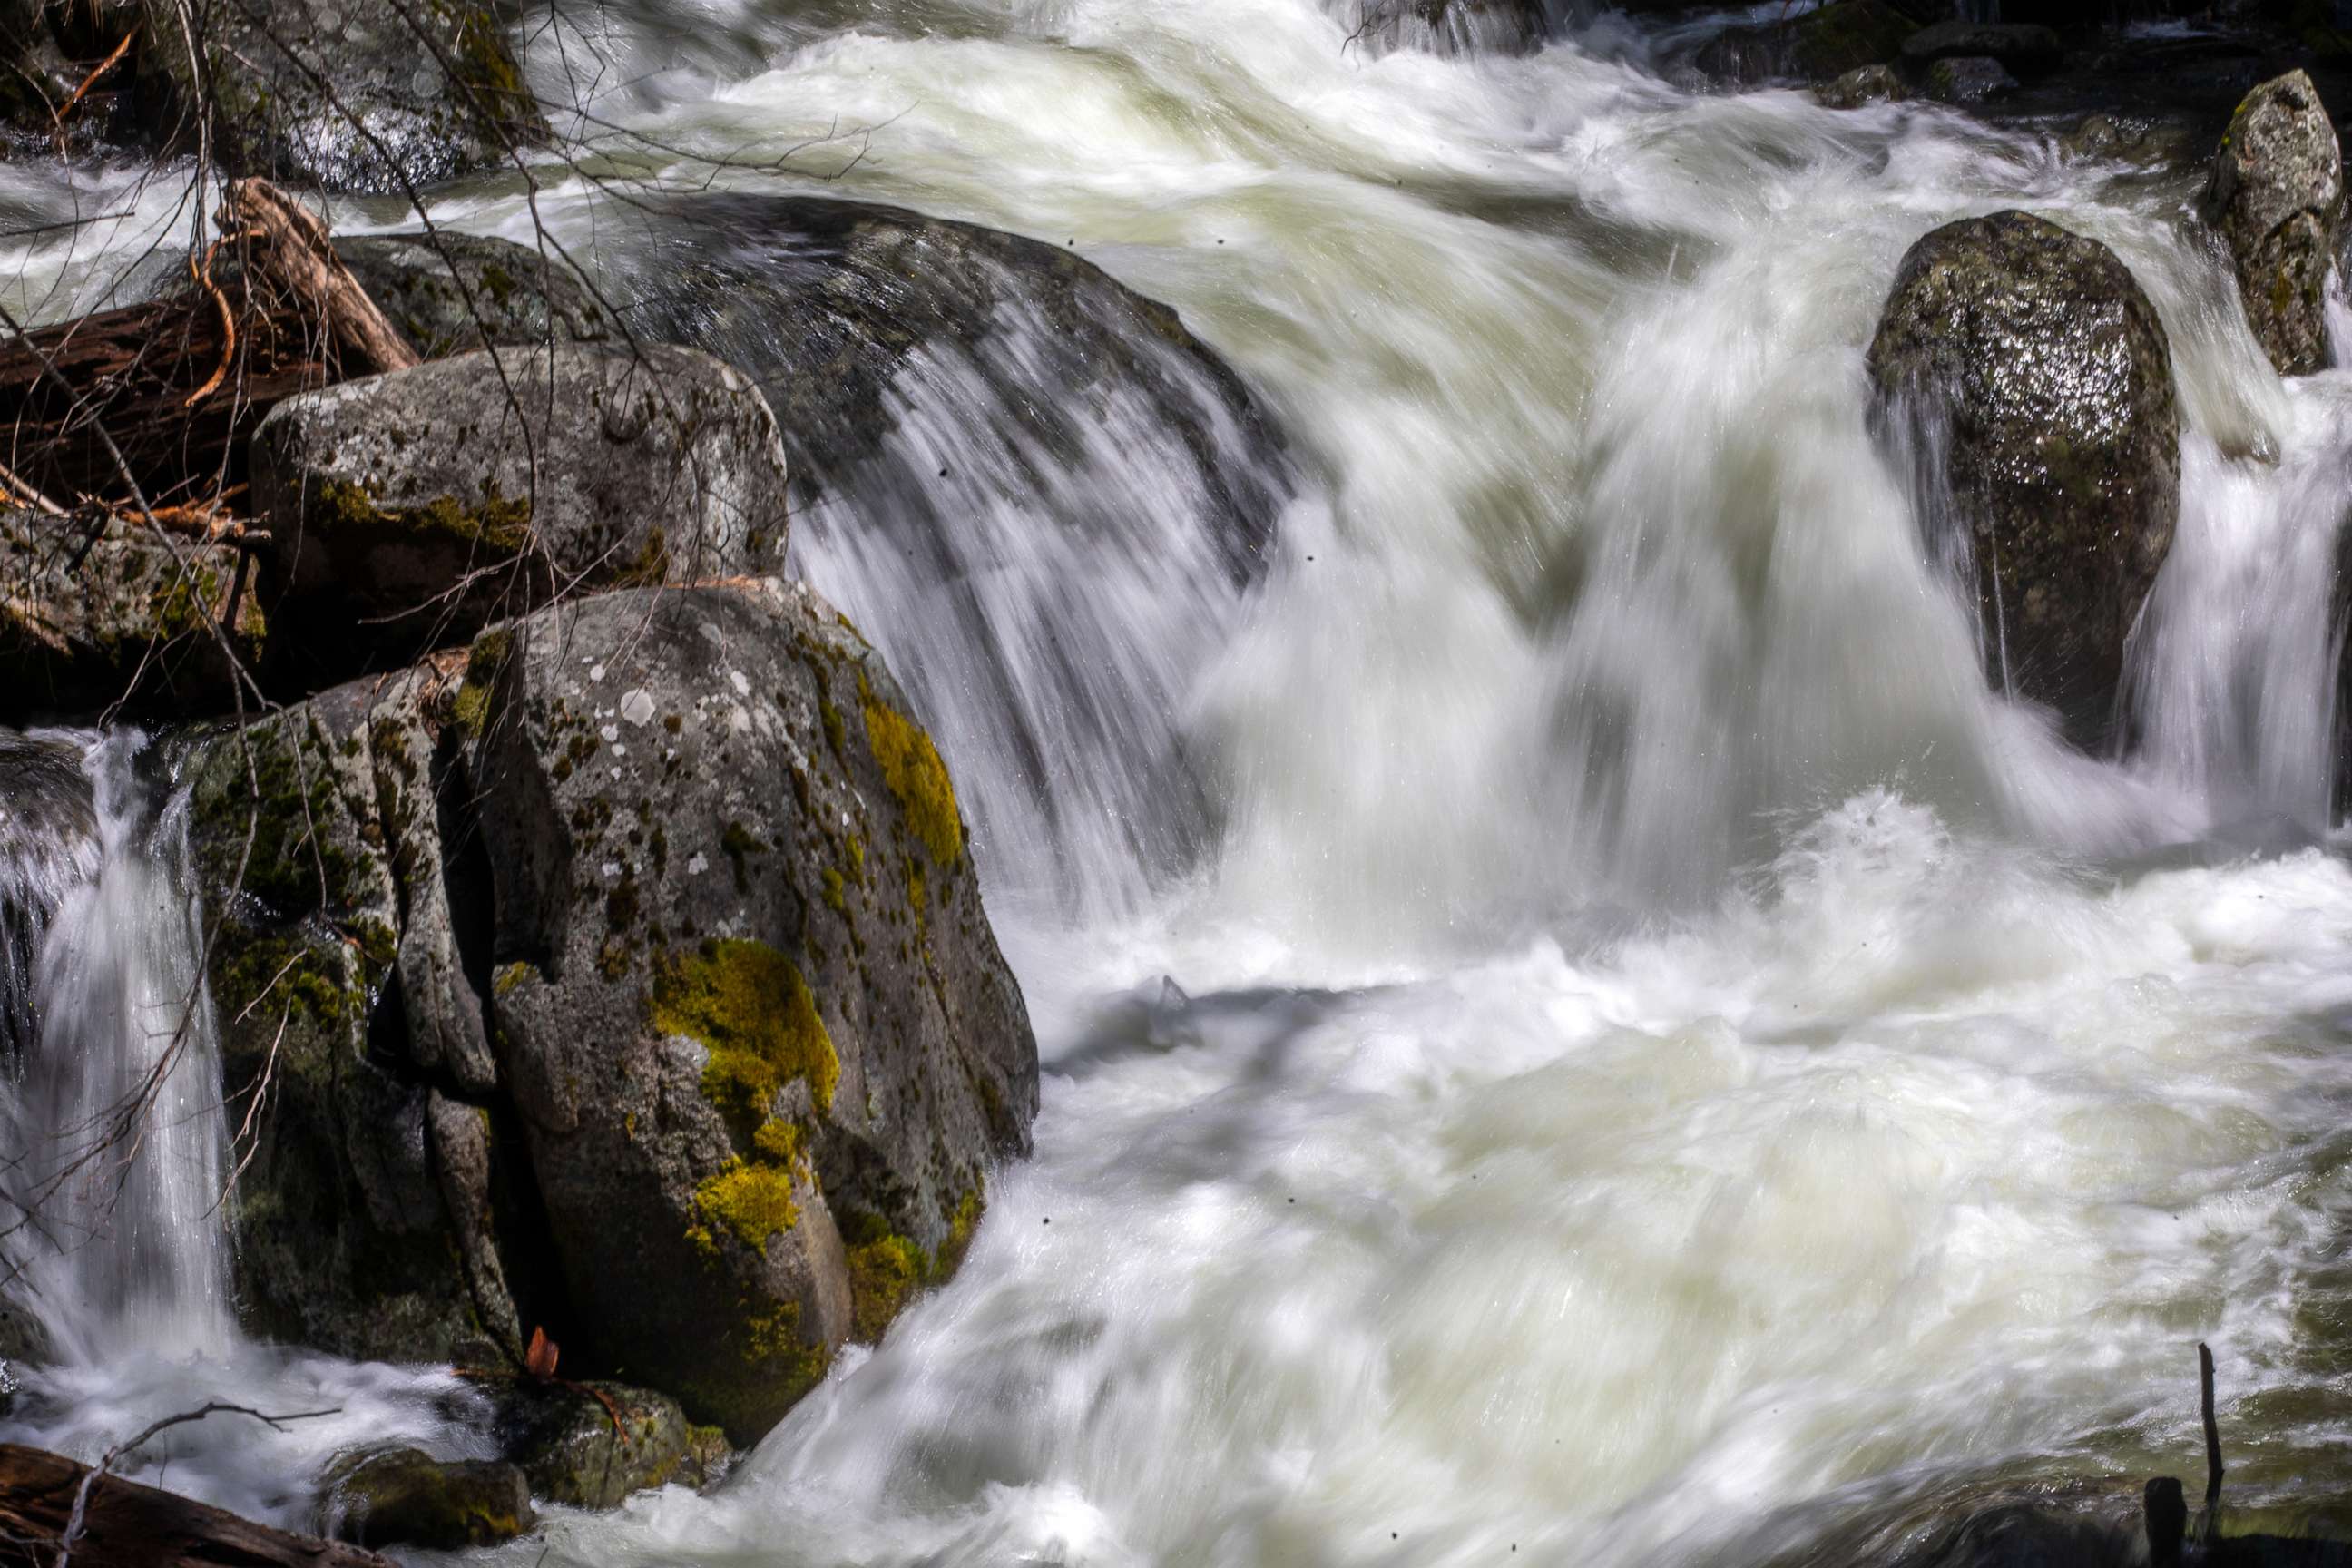 PHOTO: As the snowpack melts, water flows swiftly in Alder Creek, on April 26, 2023, in Yosemite National Park, Calif.